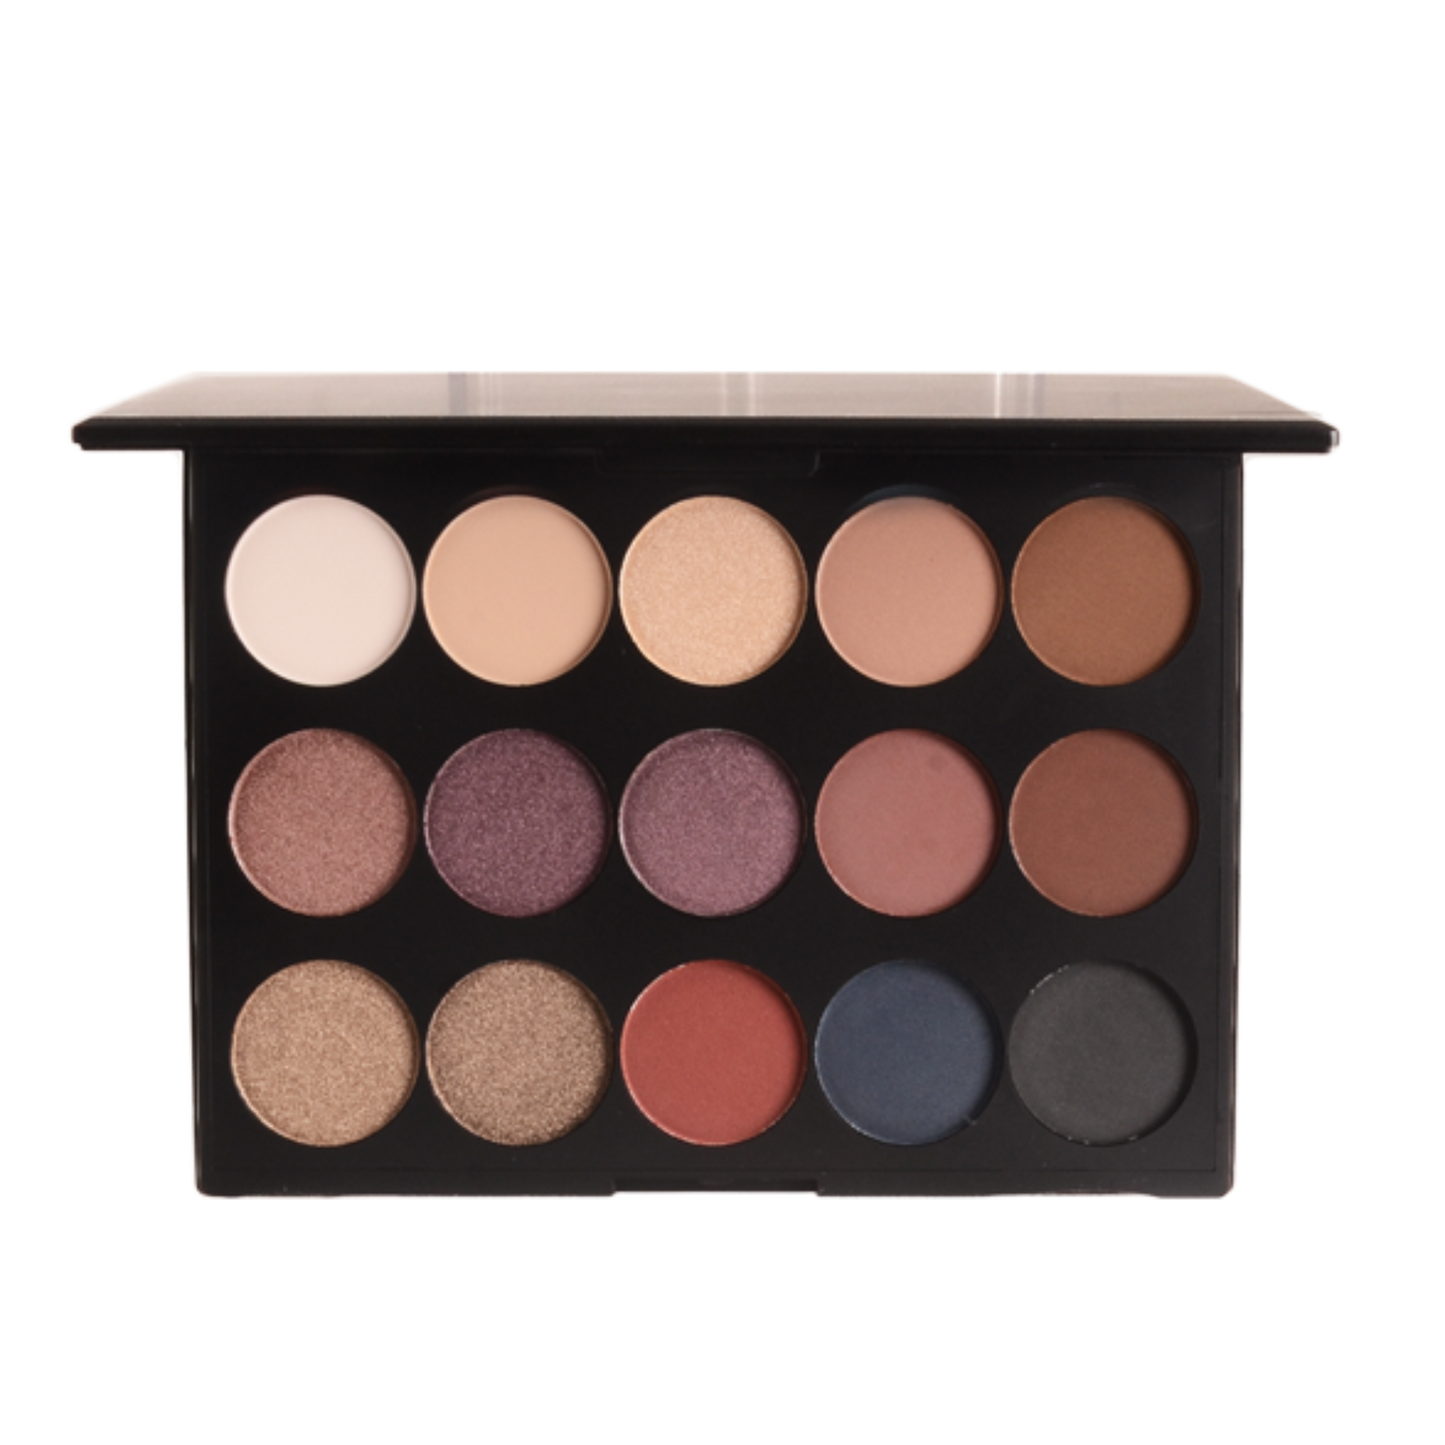 15 Shade Pro Shadow Palette